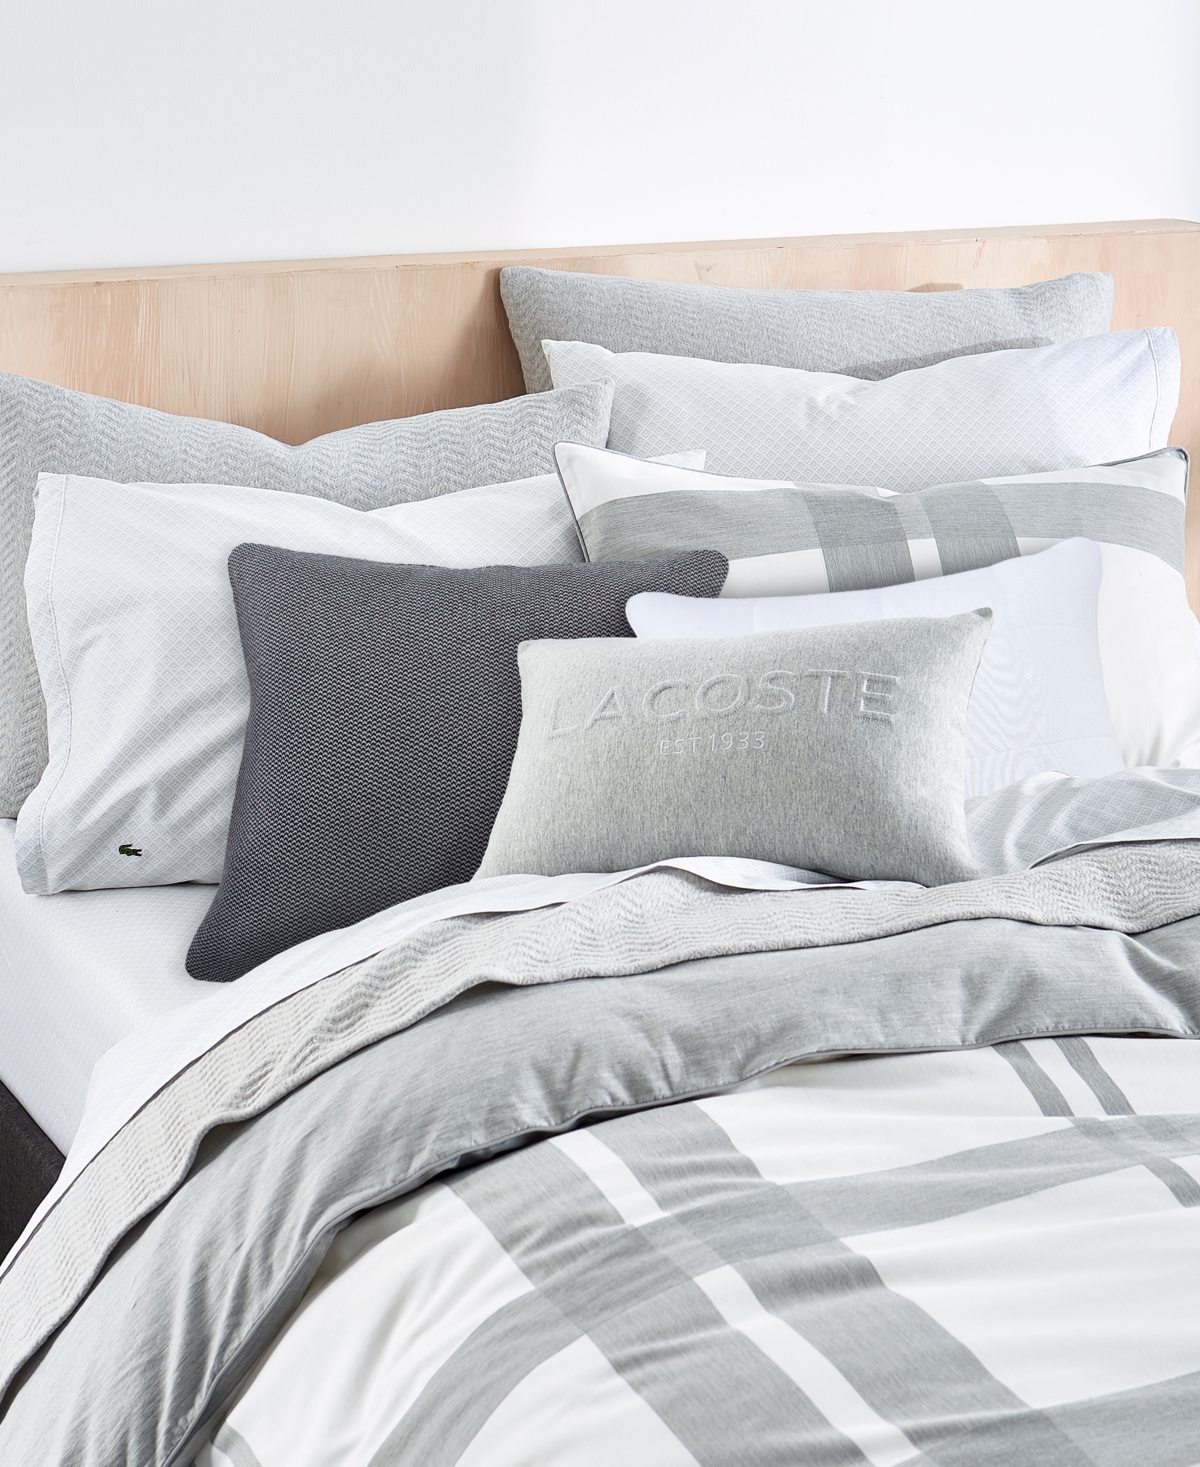 Shop Lacoste Home Baseline Duvet Cover Set, Full/queen In Micro Chip,white